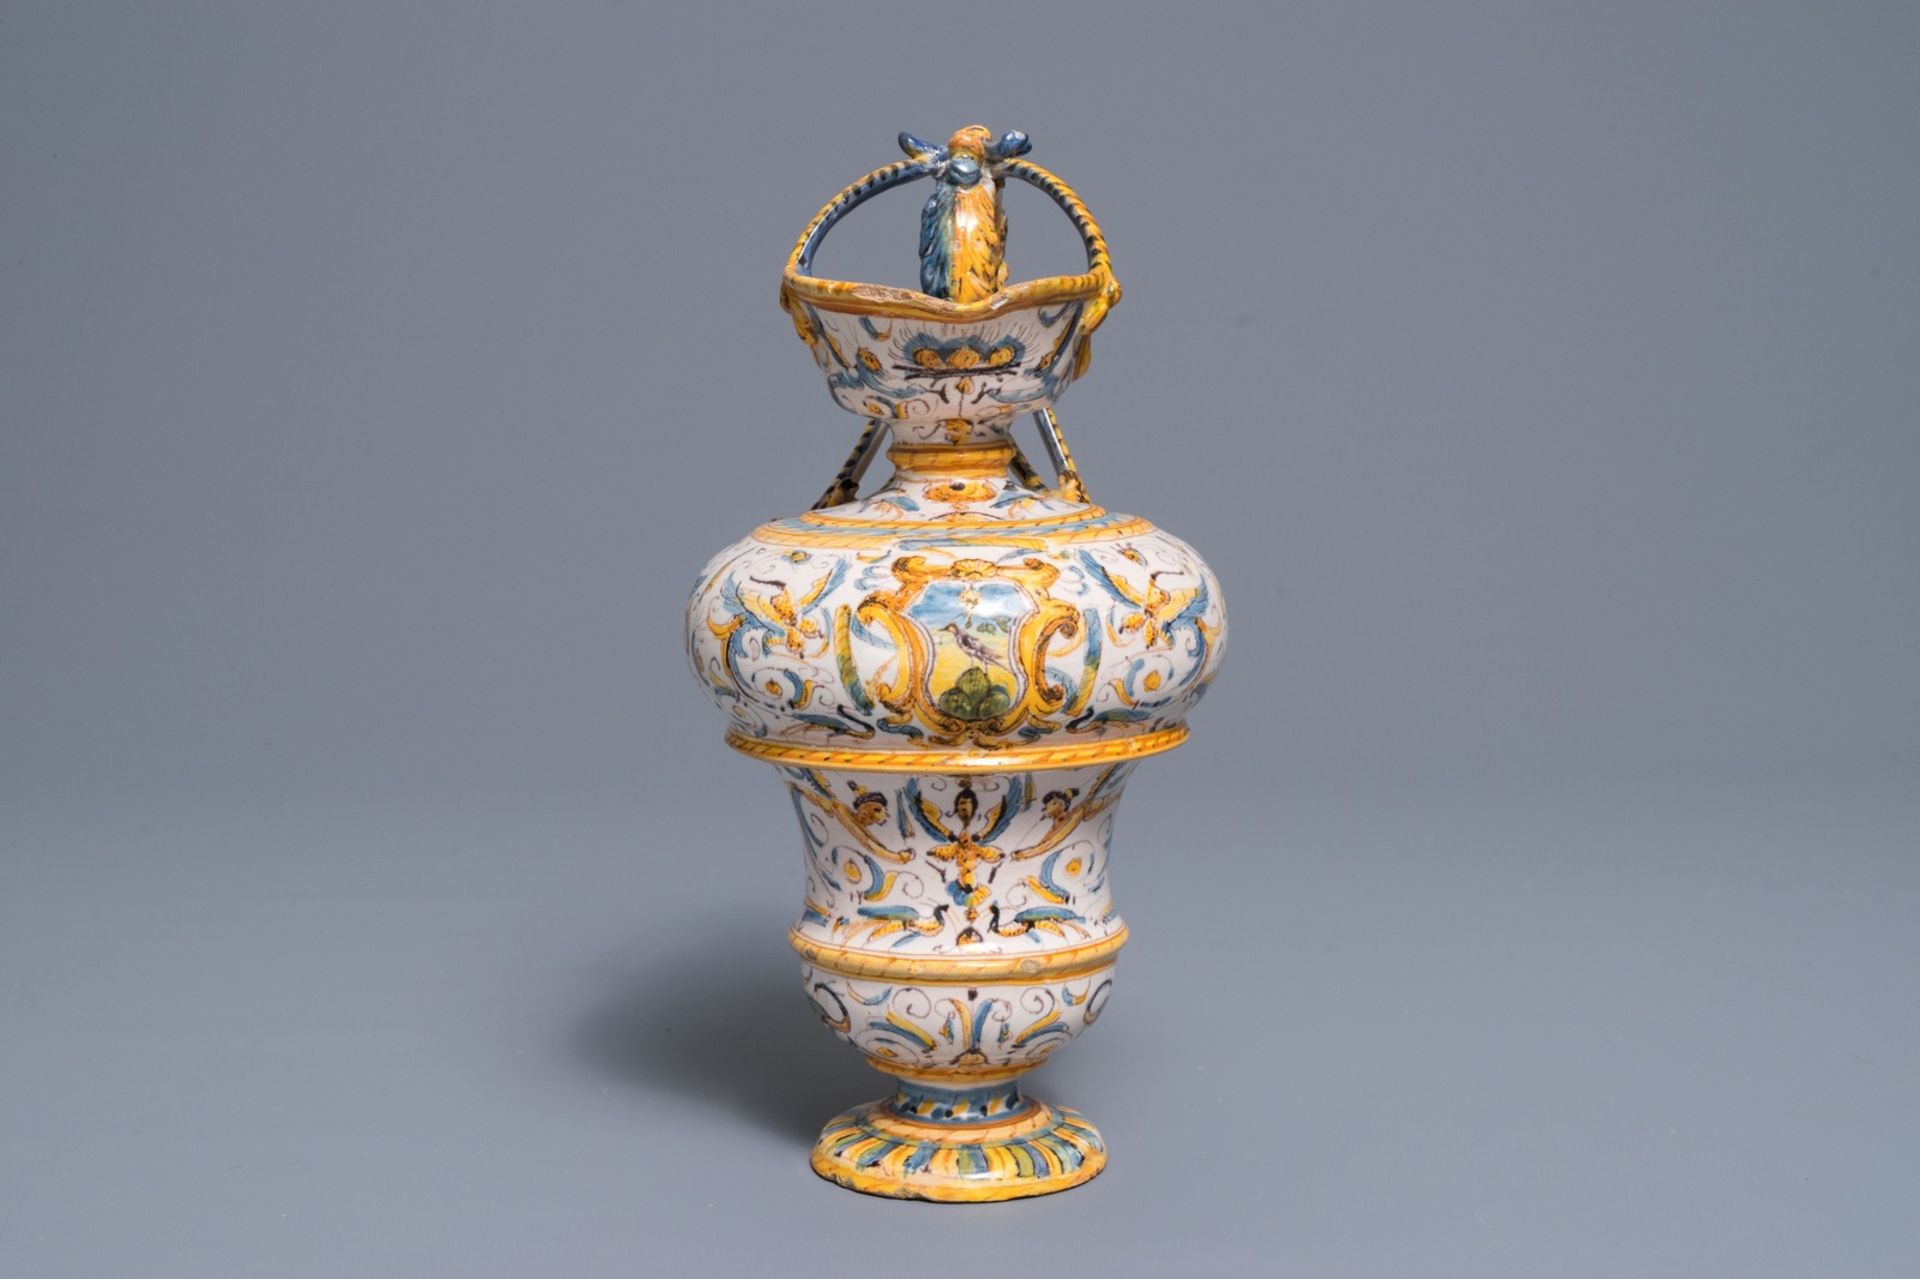 An Italian maiolica jug with grotesques, Caltagirone or Deruta, 17th C. - Image 5 of 7